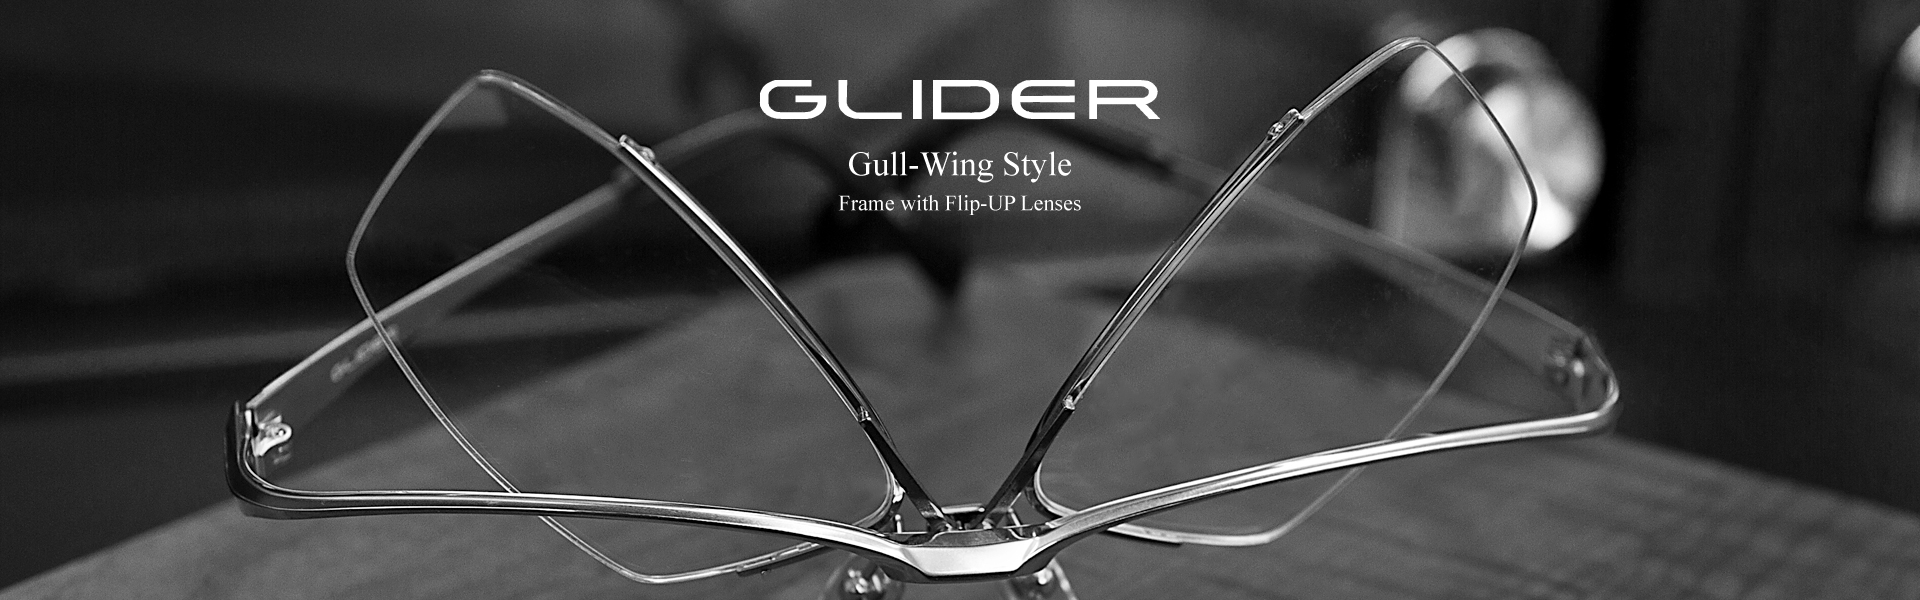 GLIDER Gull-Wing Style Frame with Flip-UP Lenses